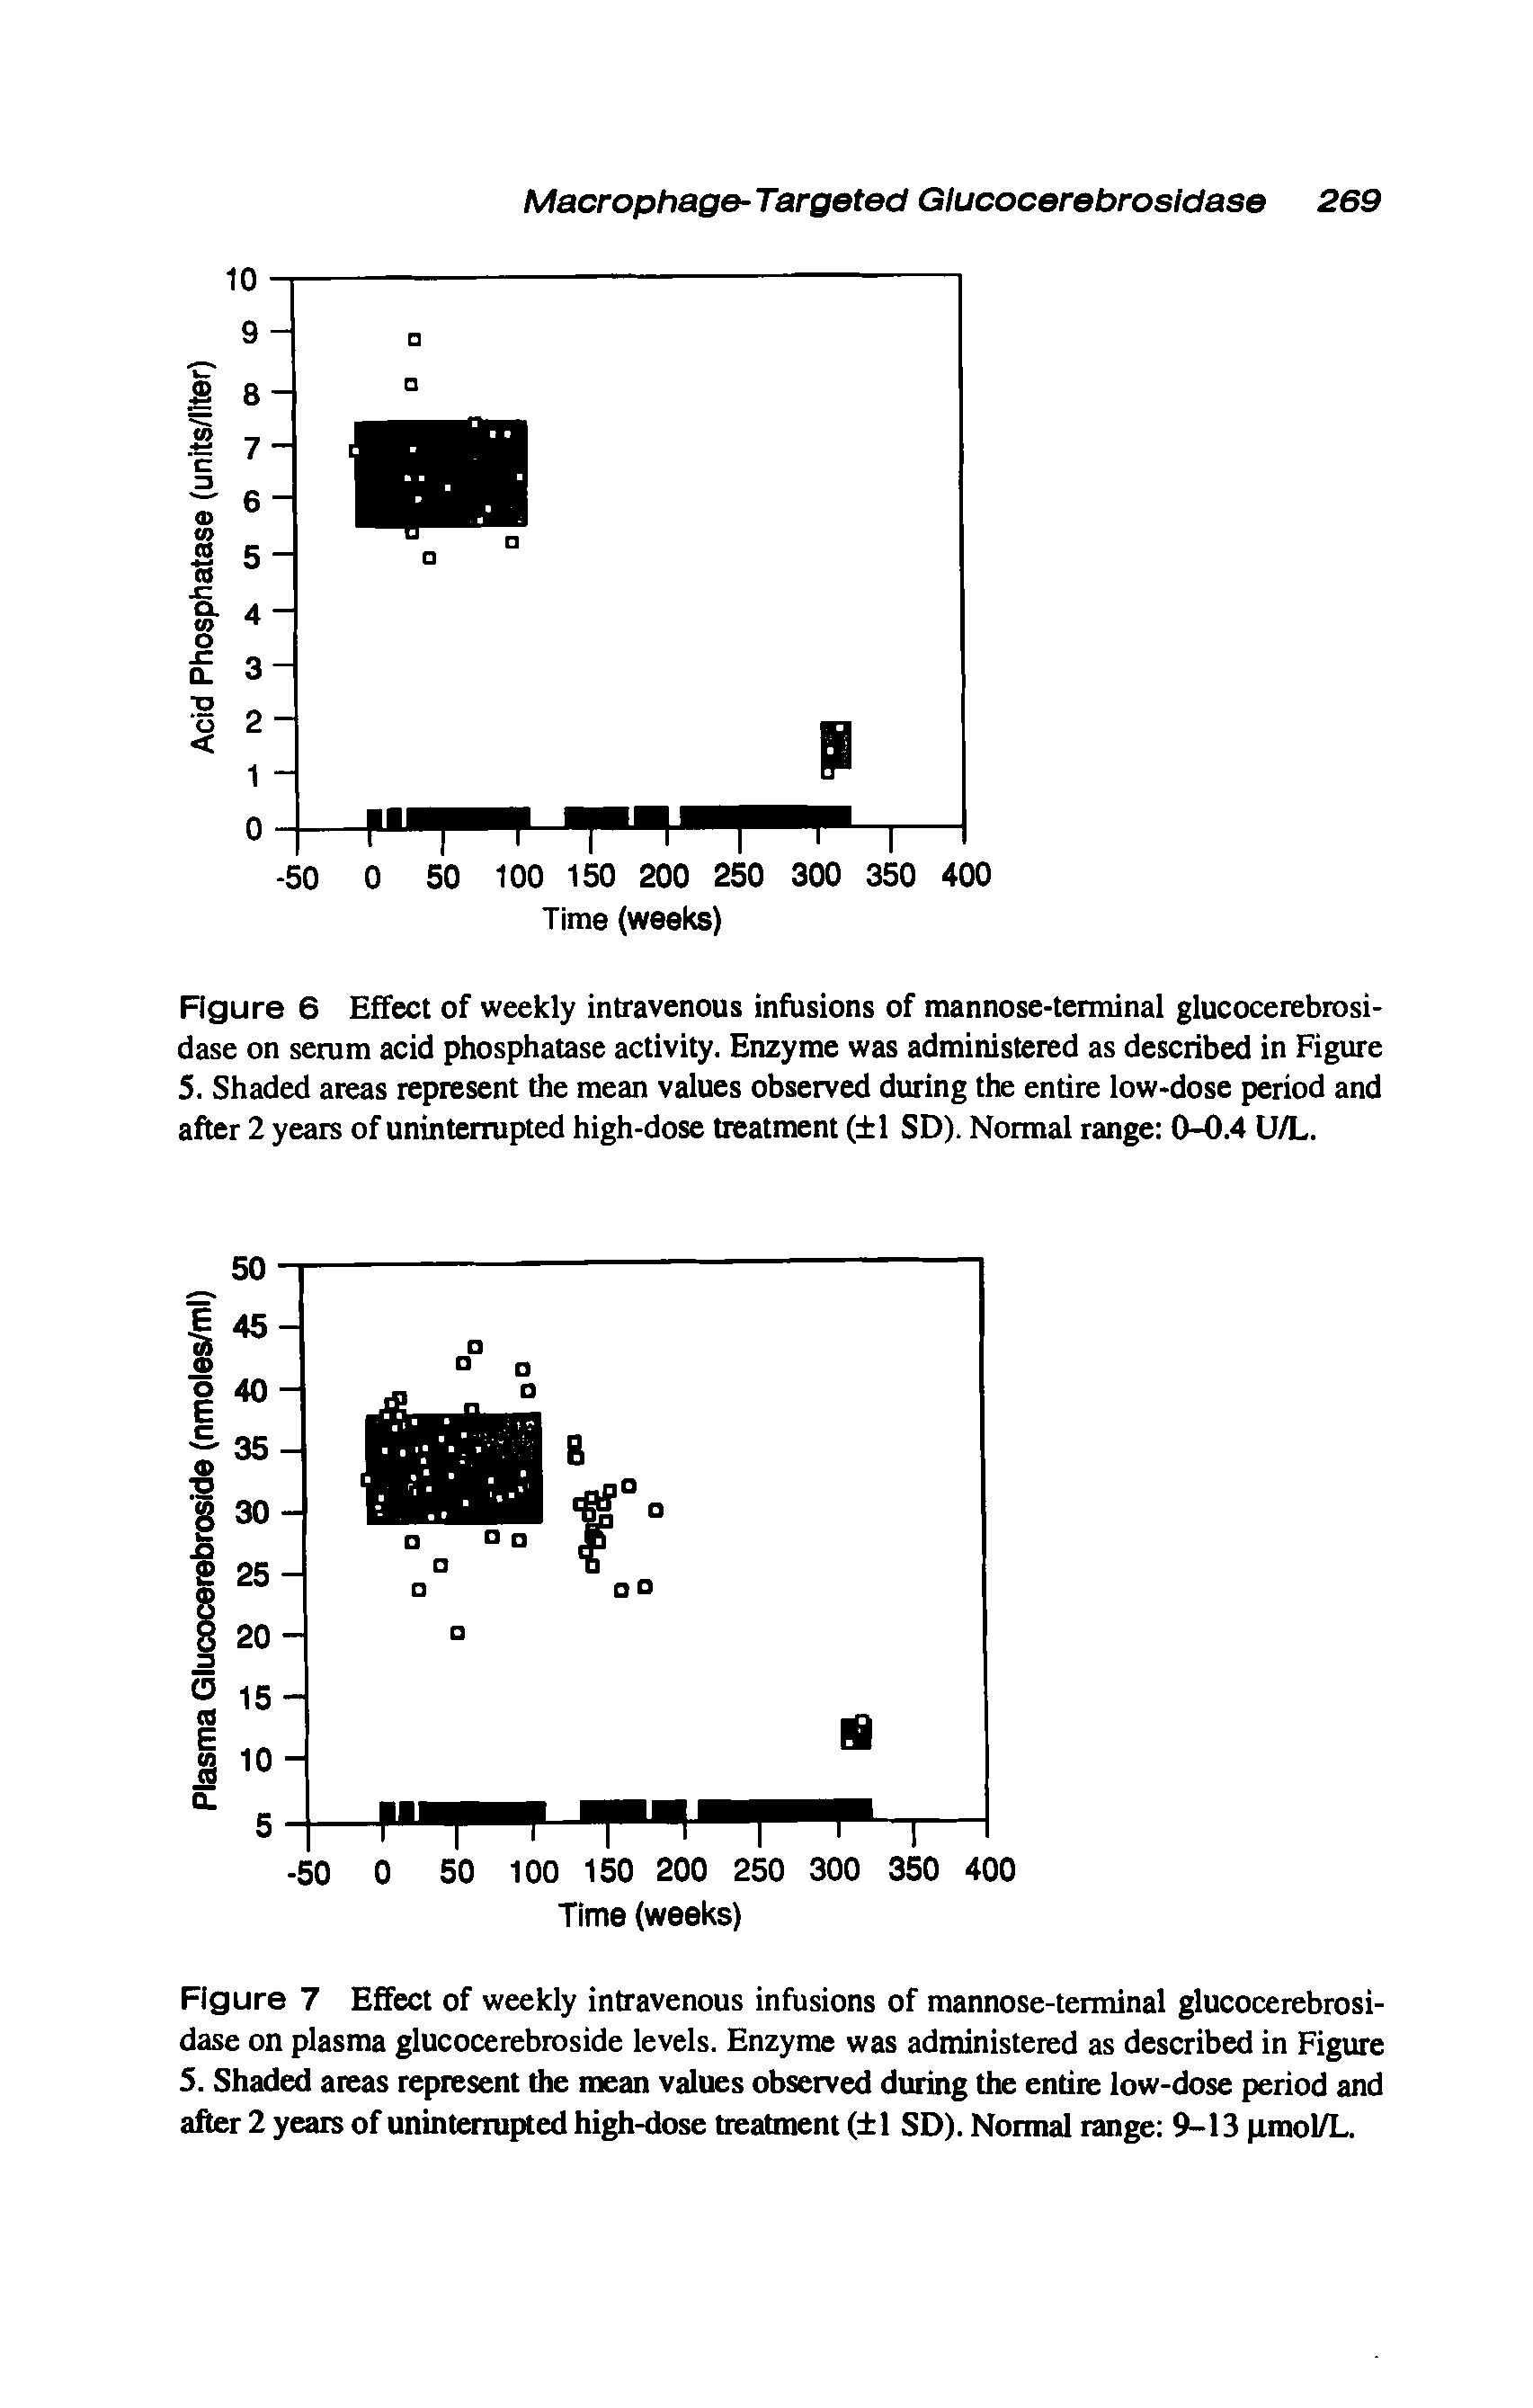 Figure 6 Effect of weekly intravenous infusions of mannose-terminal glucocerebrosidase on serum acid phosphatase activity. Enzyme was administered as described in Figure 5. Shaded areas represent the mean values observed during the entire low-dose period and after 2 years of uninterrupted high-dose treatment ( 1 SD). Normal range 0-0.4 U/L.